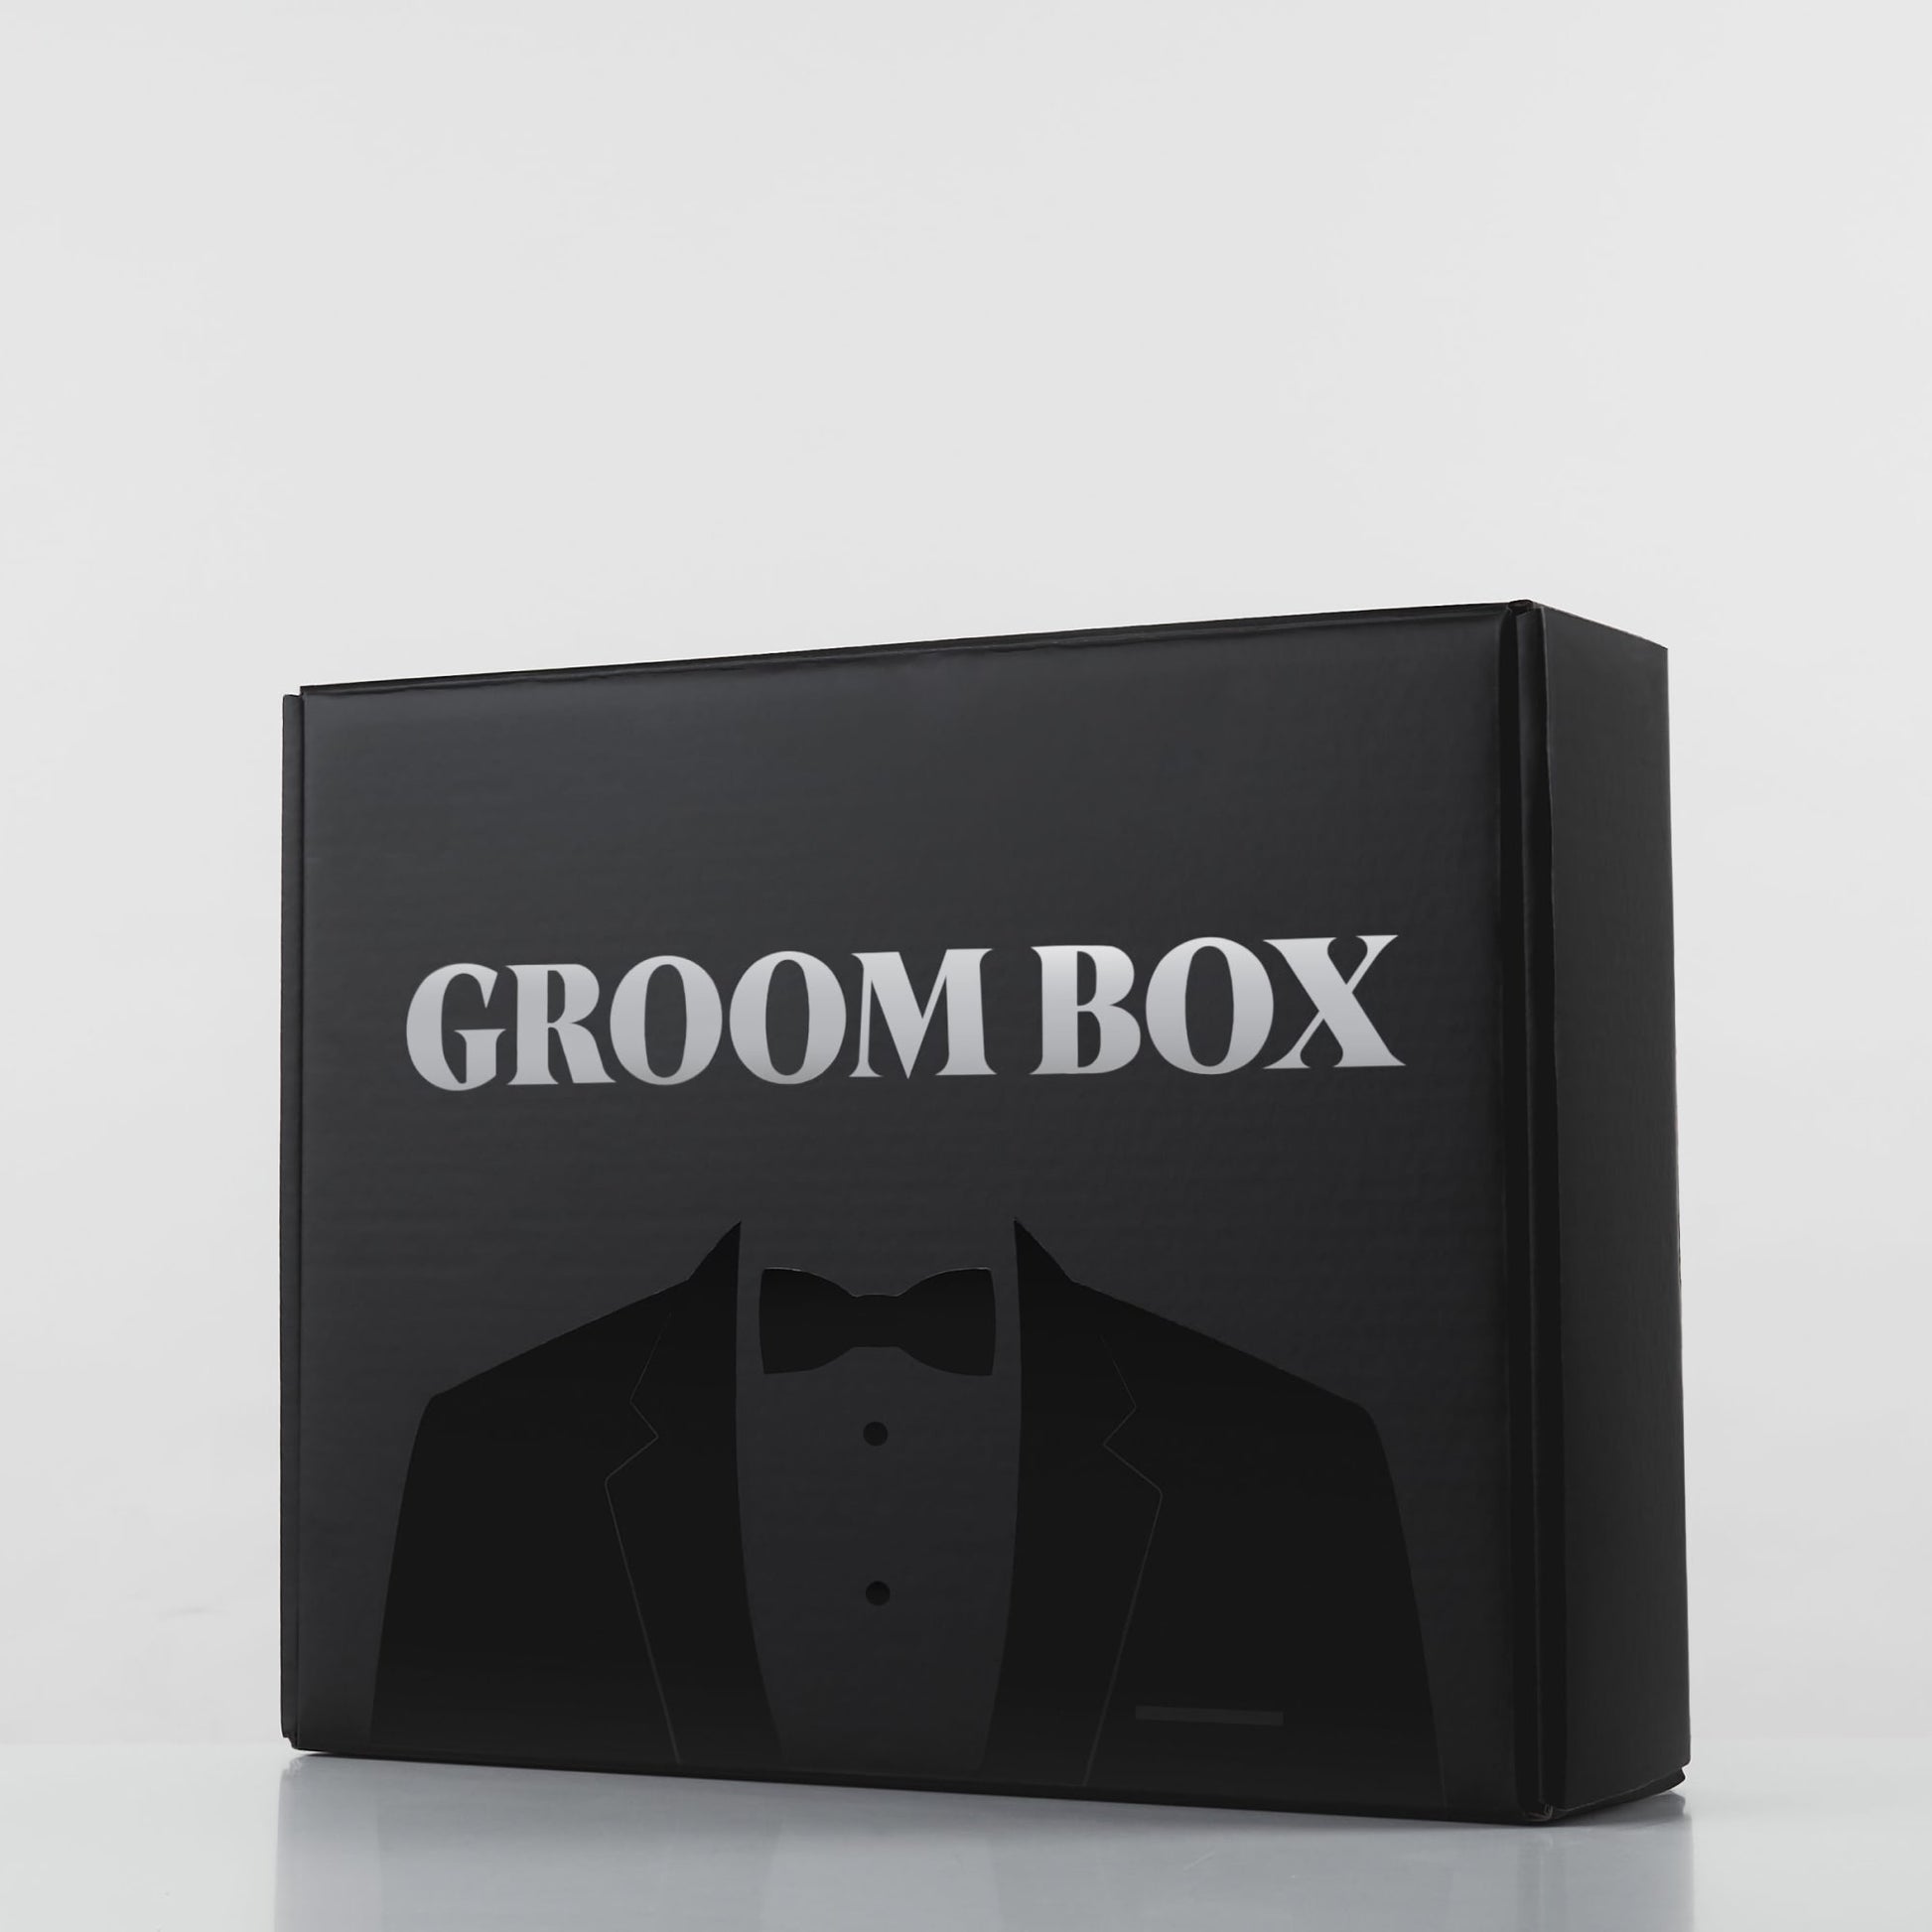 10-in-1 Ultimate Groom Box filled with premium, curated goodies that he will enjoy even after the big day.